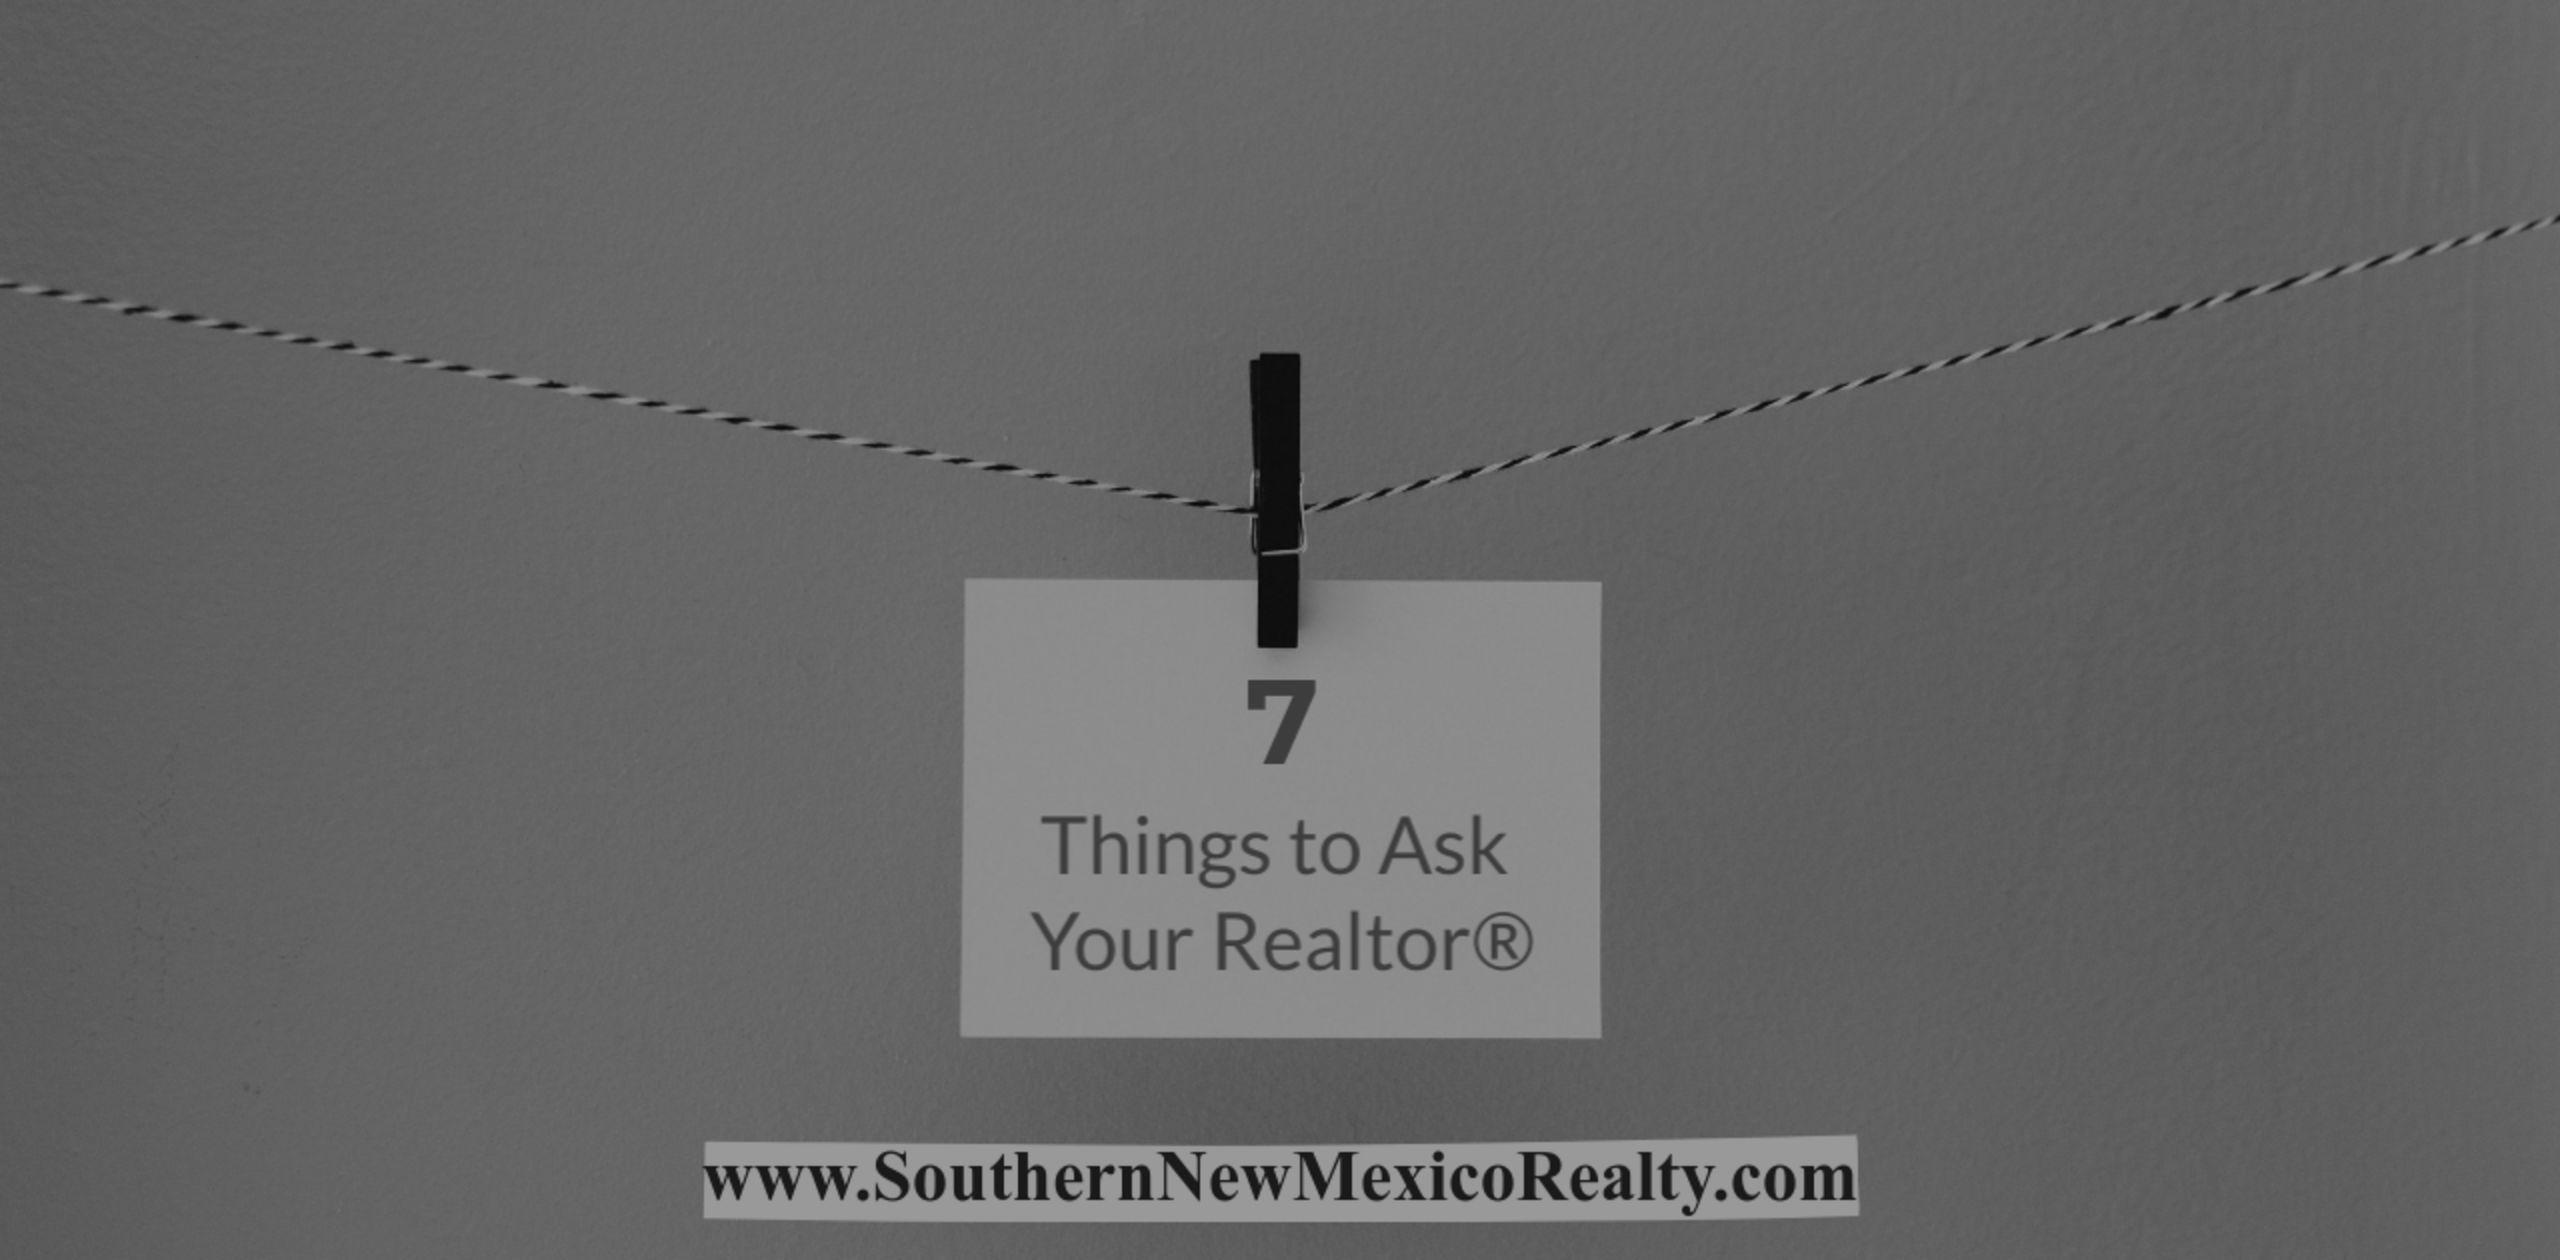 7 Things to Ask Your Realtor® When Selling a Home